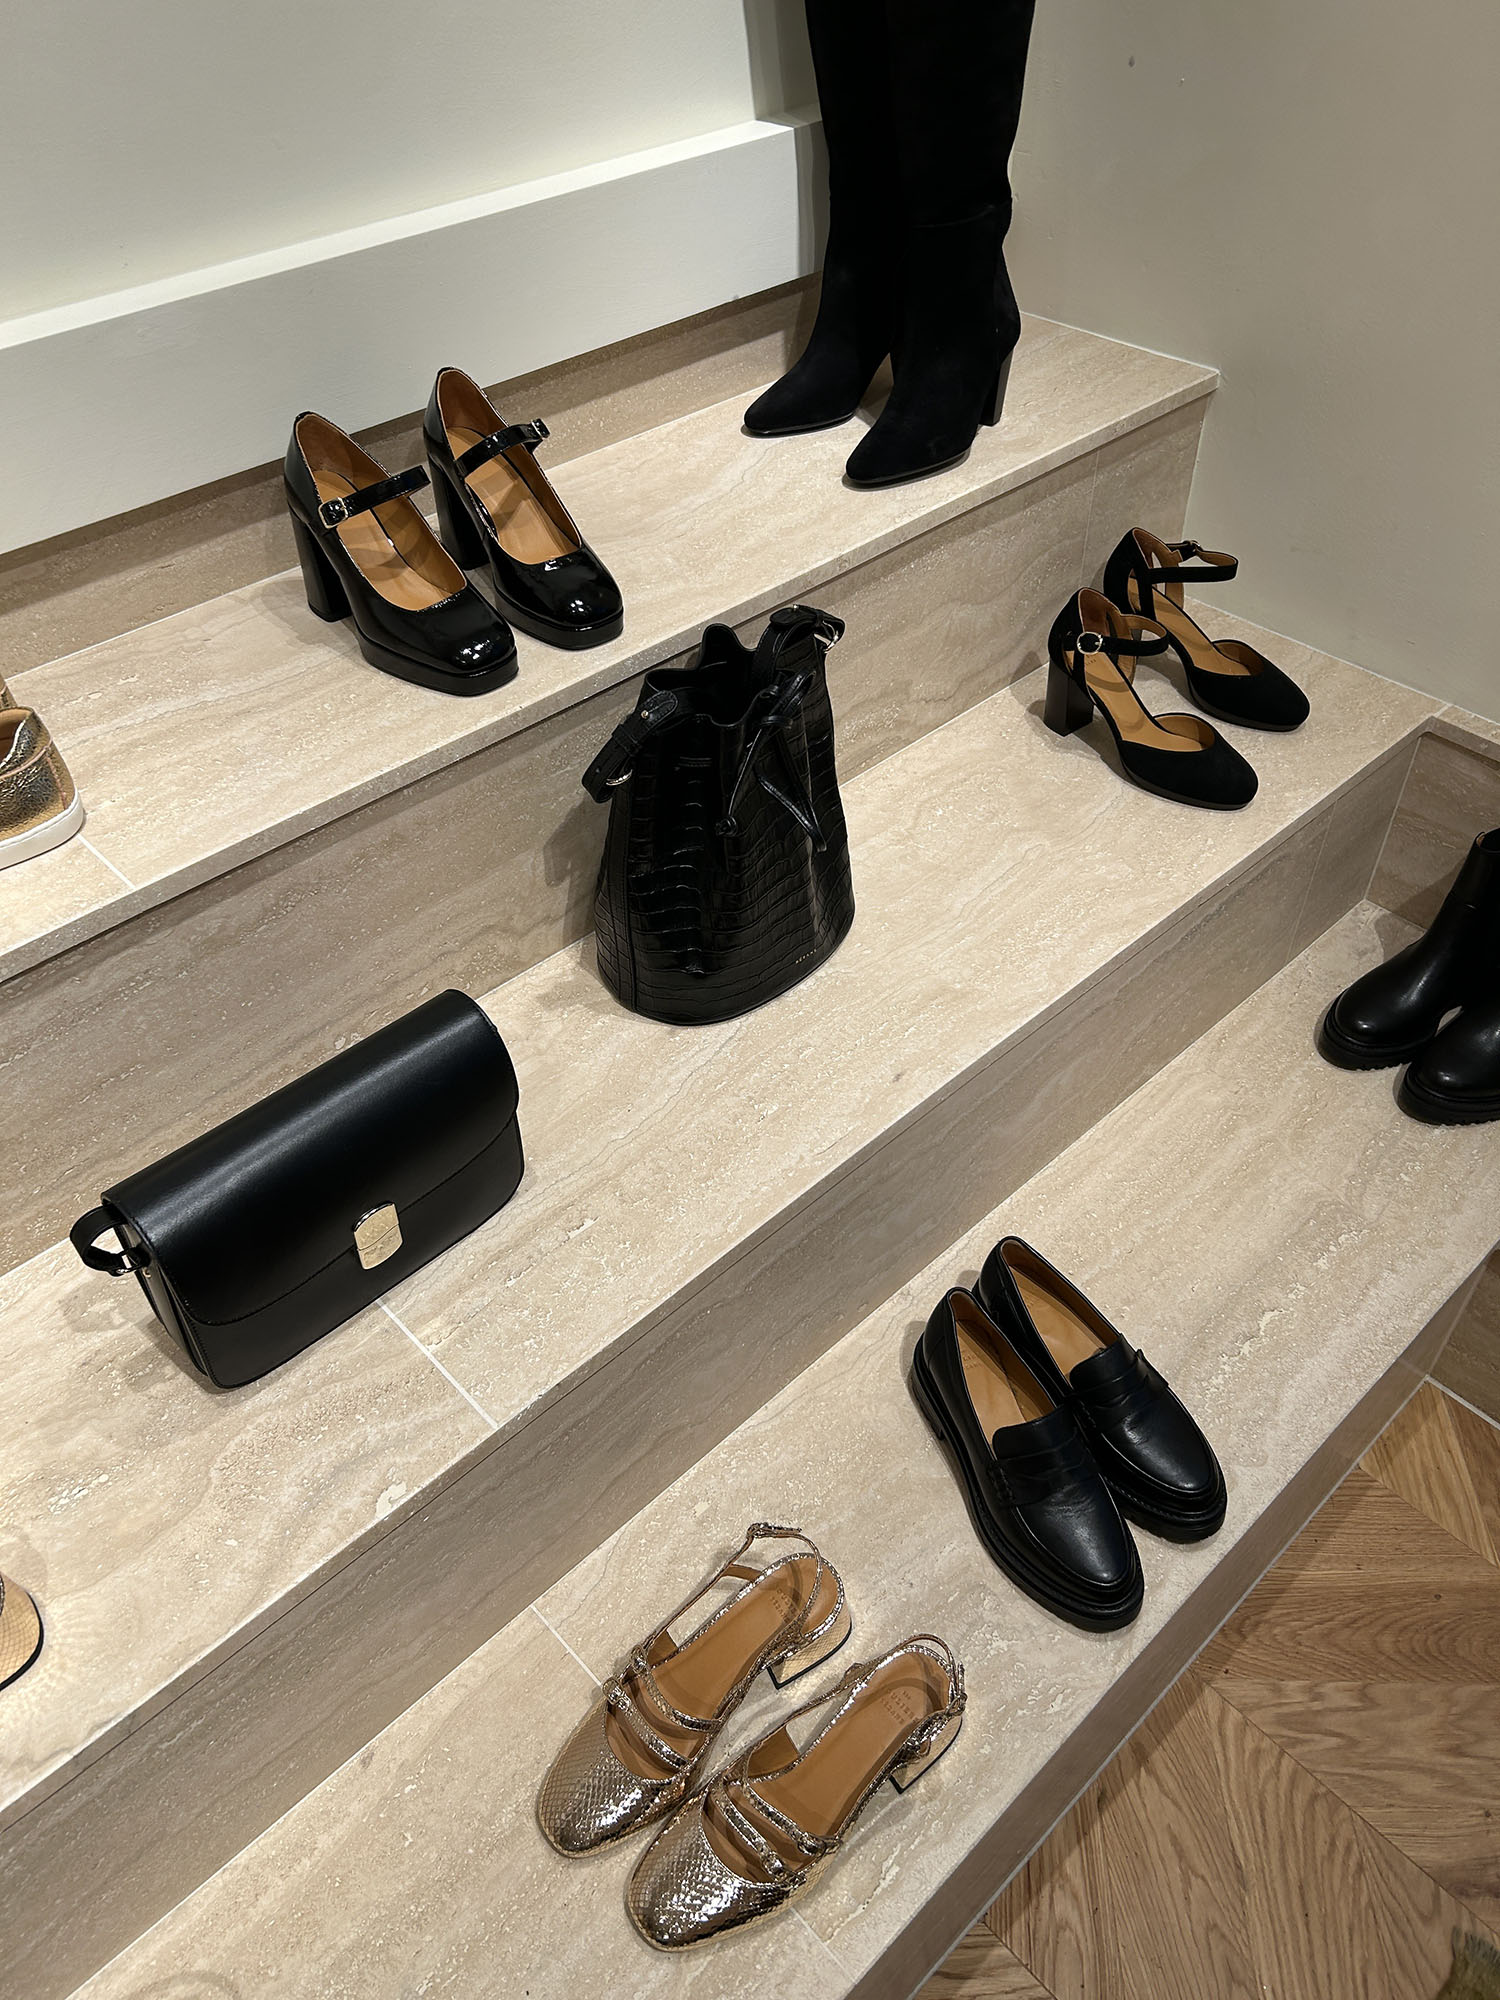 Coco & Voltaire - Black shoes and purses displayed on a marble shelf at Sezane in Marleybone, London